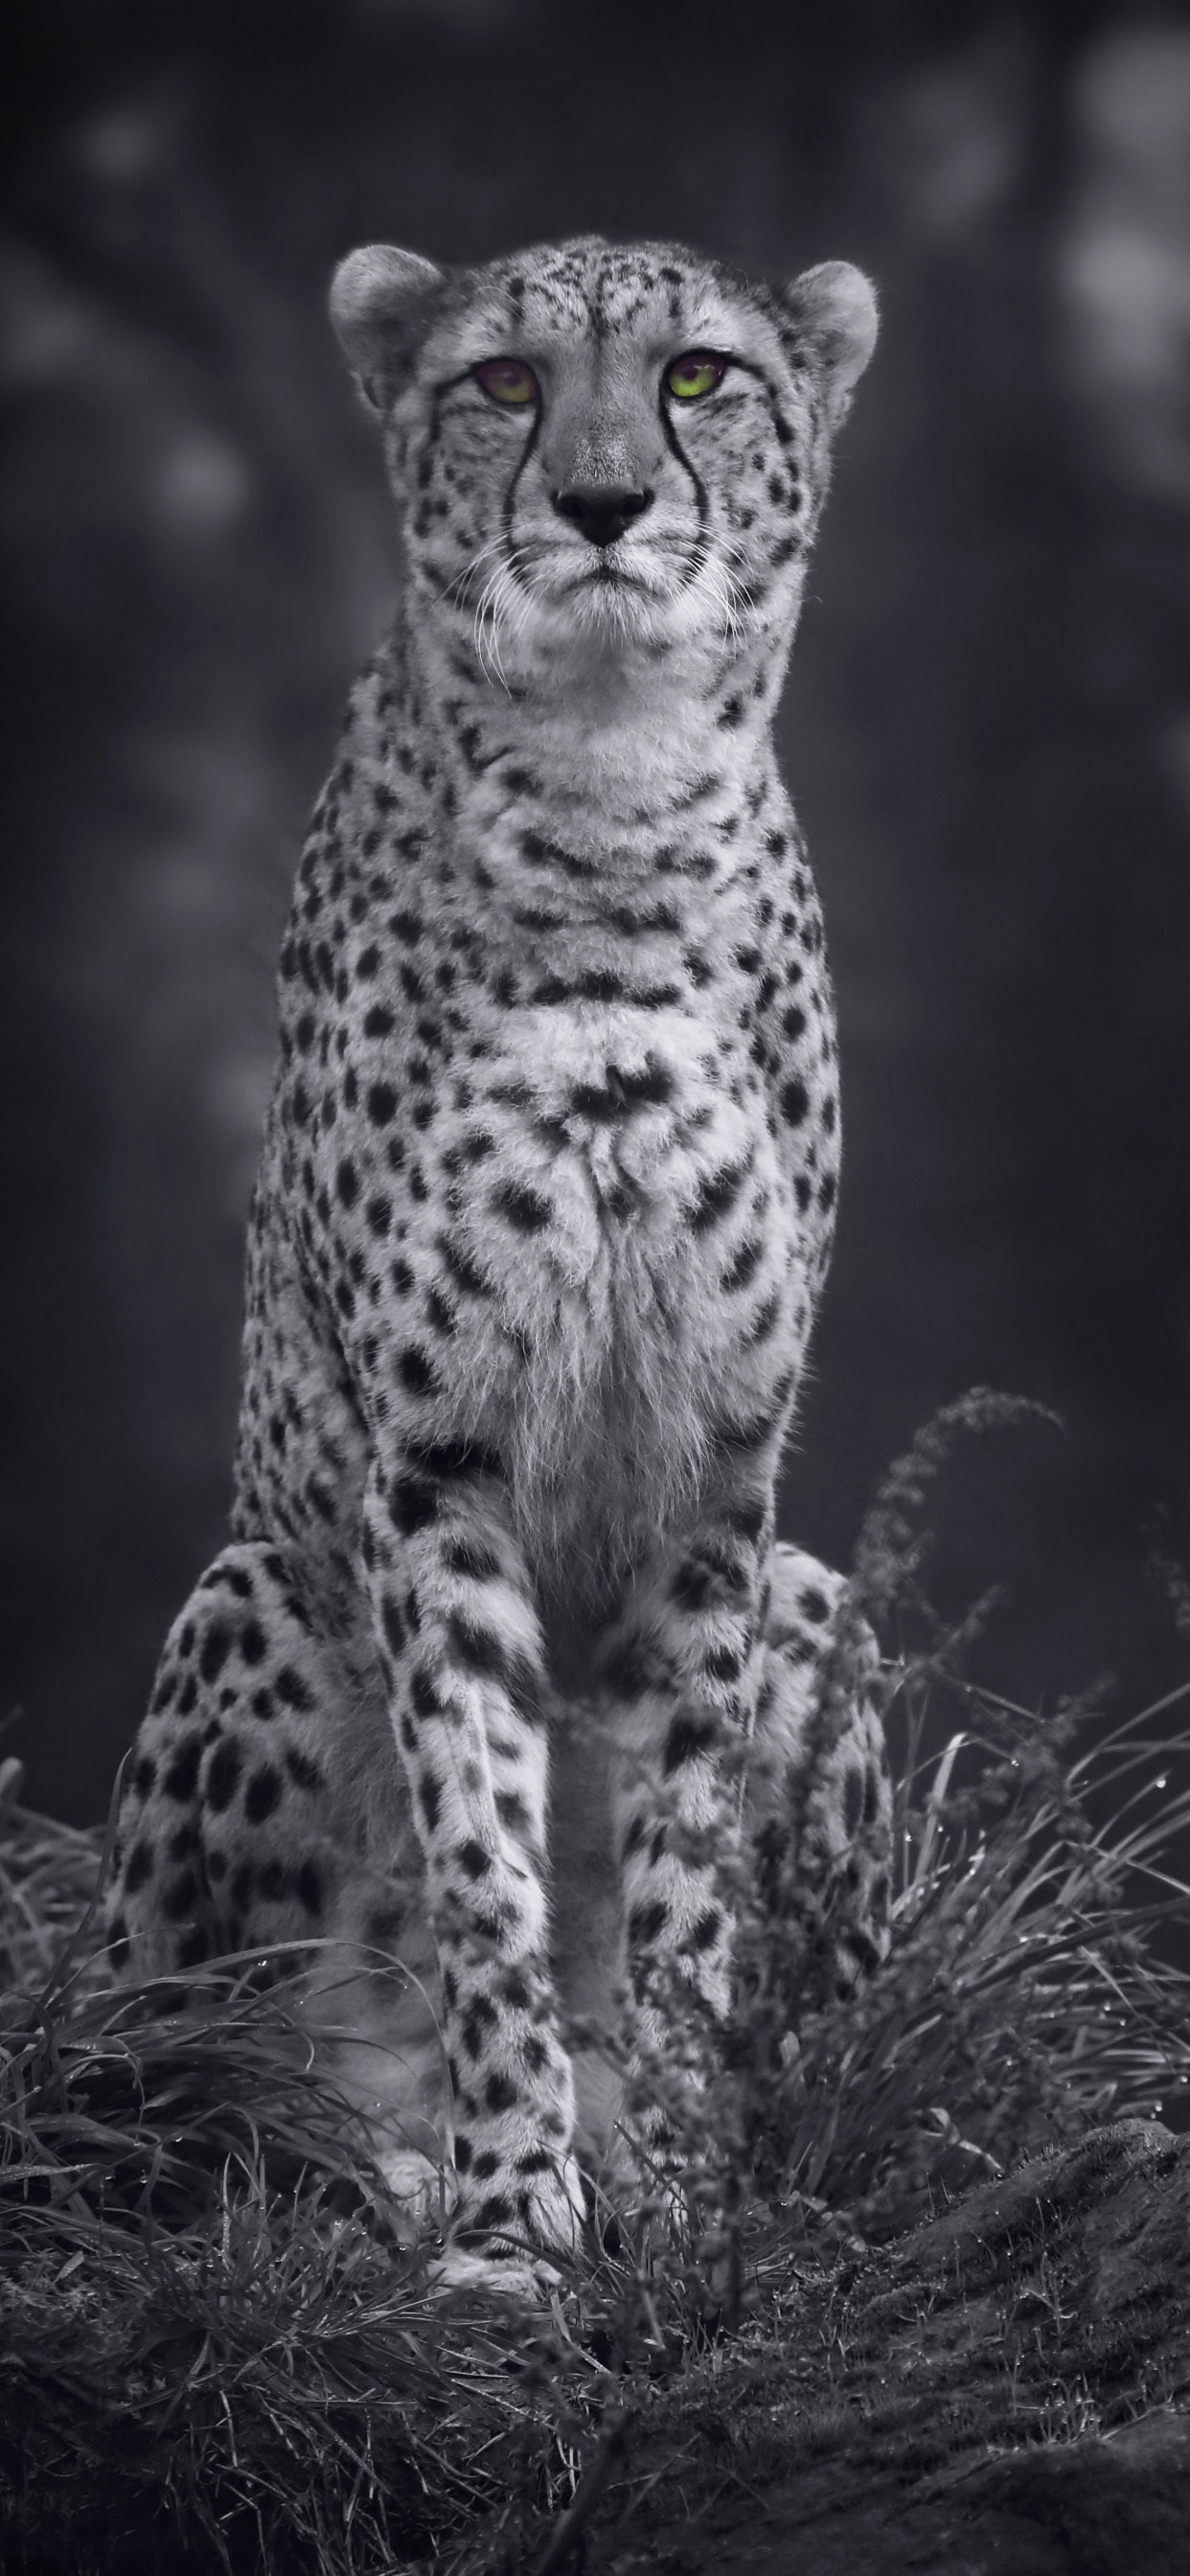 Grayscale Photo of Cheetah on Grass. Wallpaper in 1242x2688 Resolution